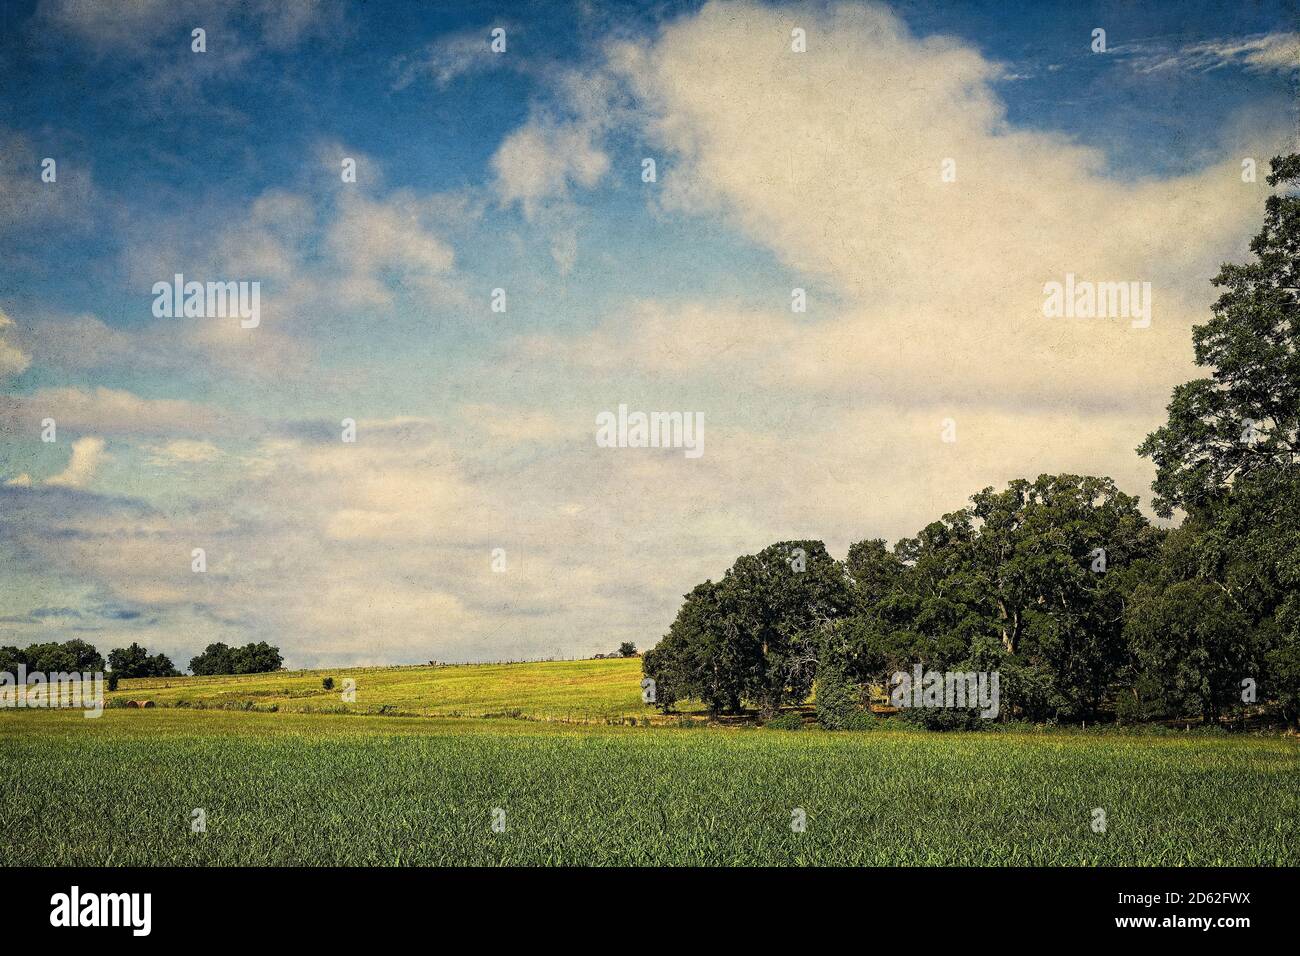 Expansive Texas Hill Country ranch land under a blue sky with puffy white clouds and trees encroaching into the scene. Stock Photo